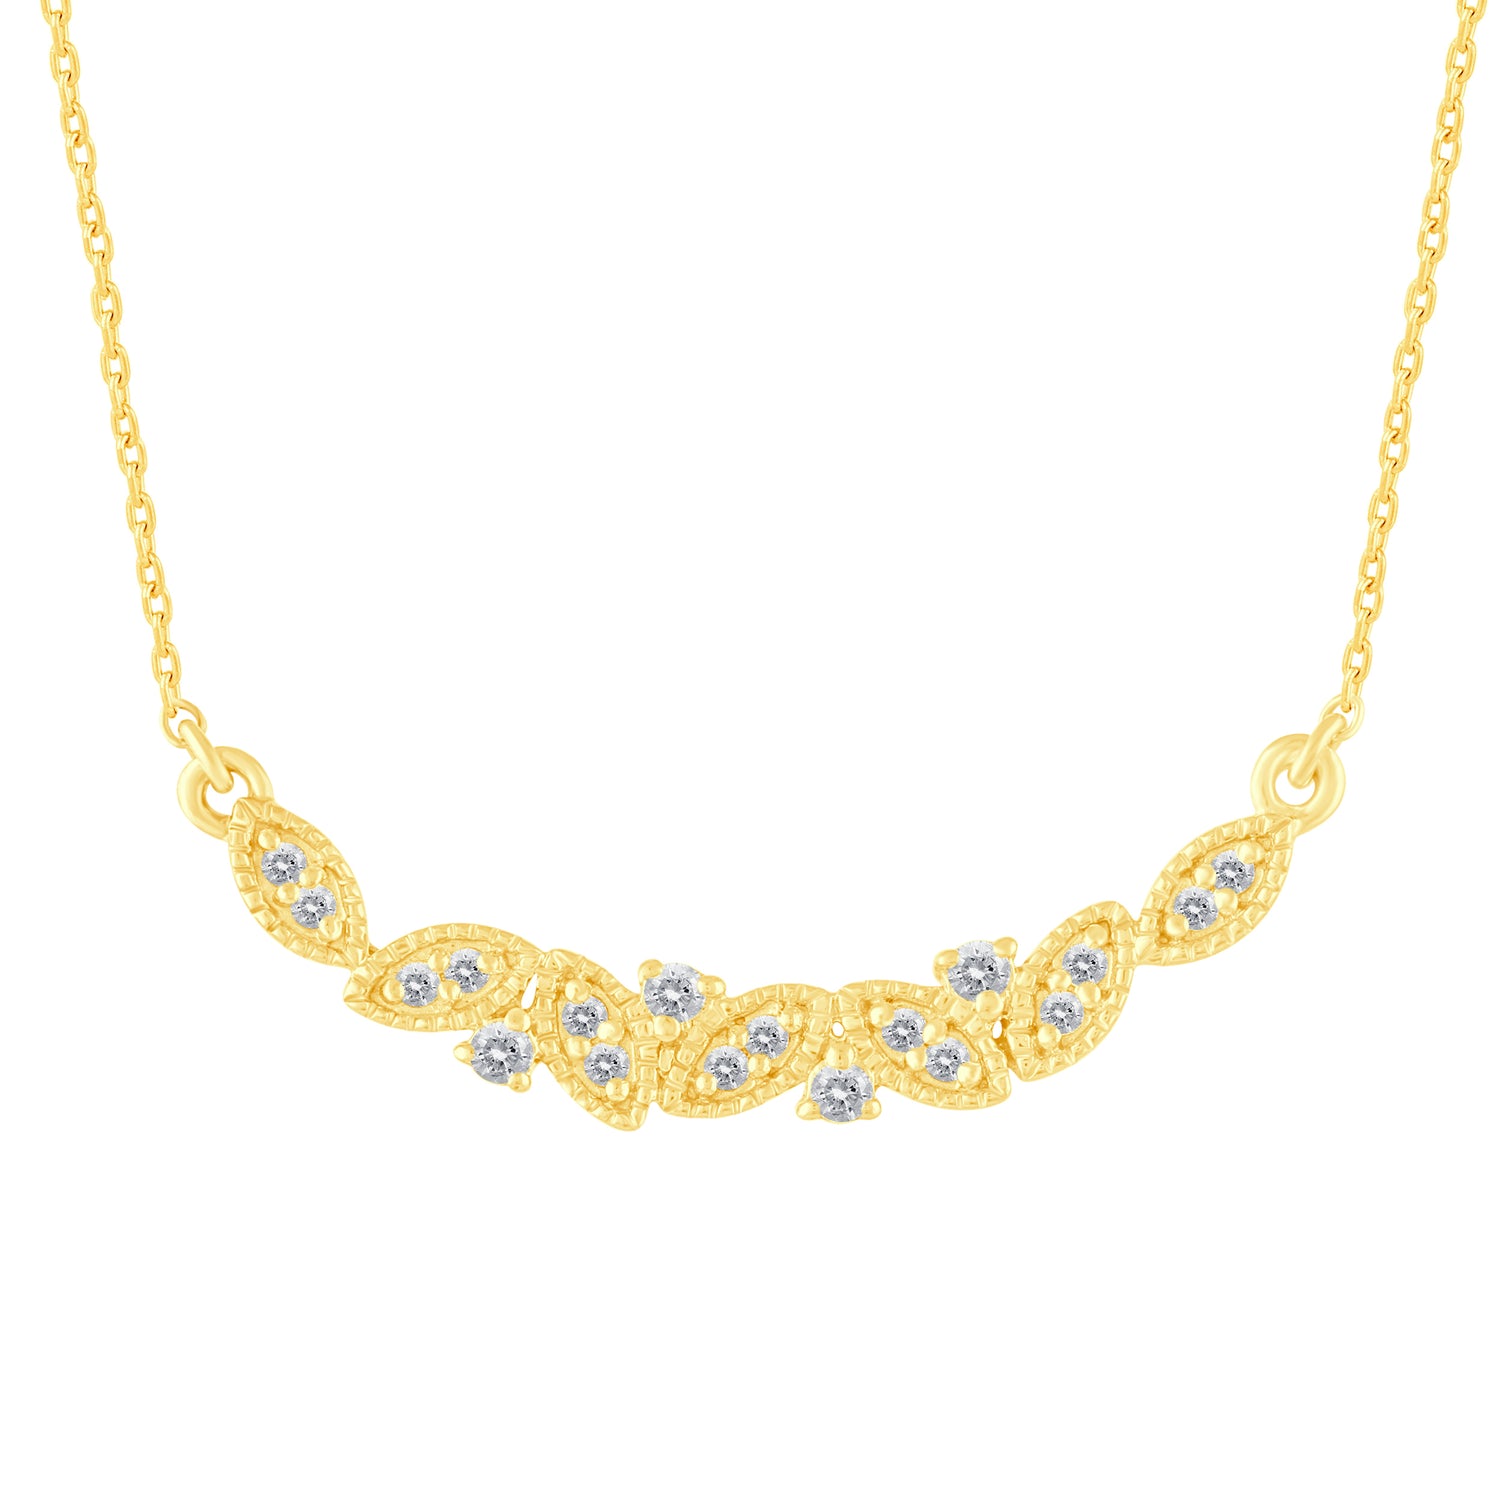 1/5 Cttw Diamond Mosaic Crescent Moon Smile Bar Pendant Necklace set in 925 Sterling Silver Yellow Gold Plating